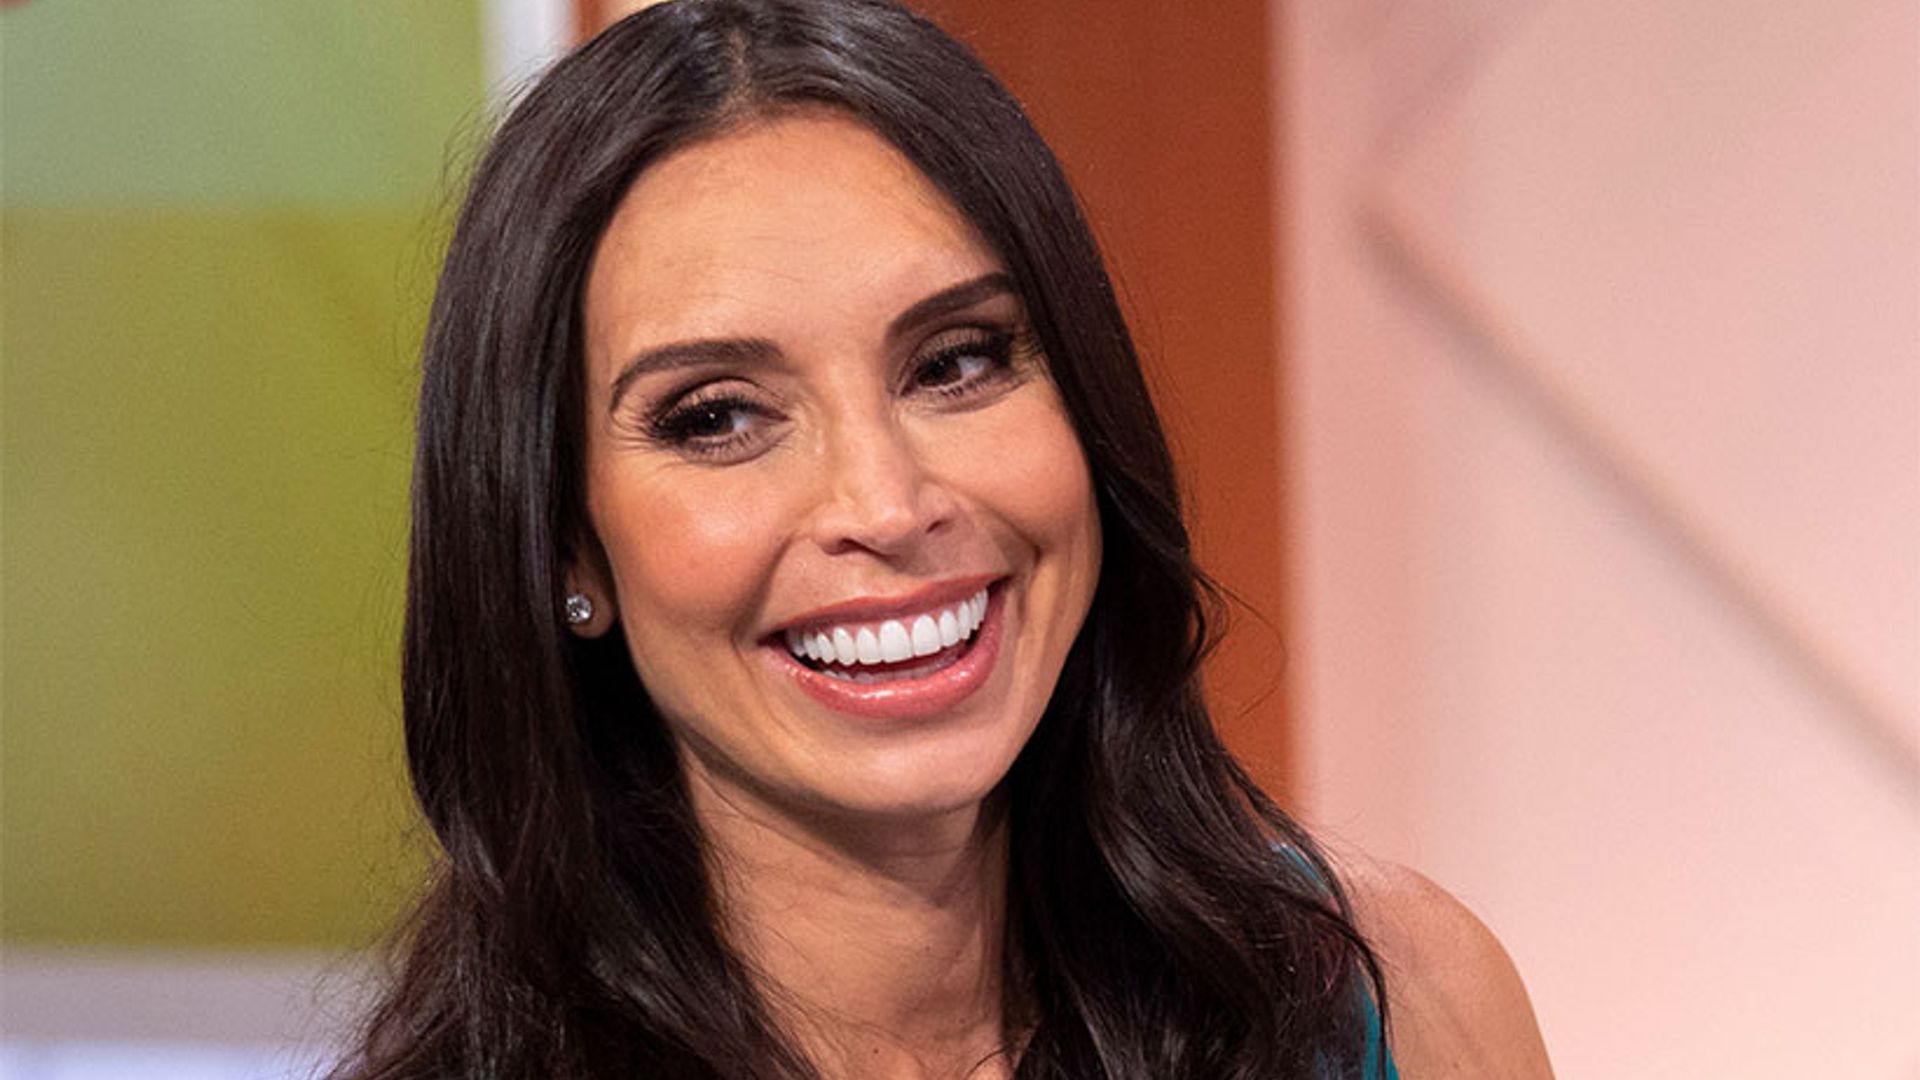 Pregnancy is really suiting Christine Lampard's style – and this high street dress proves it